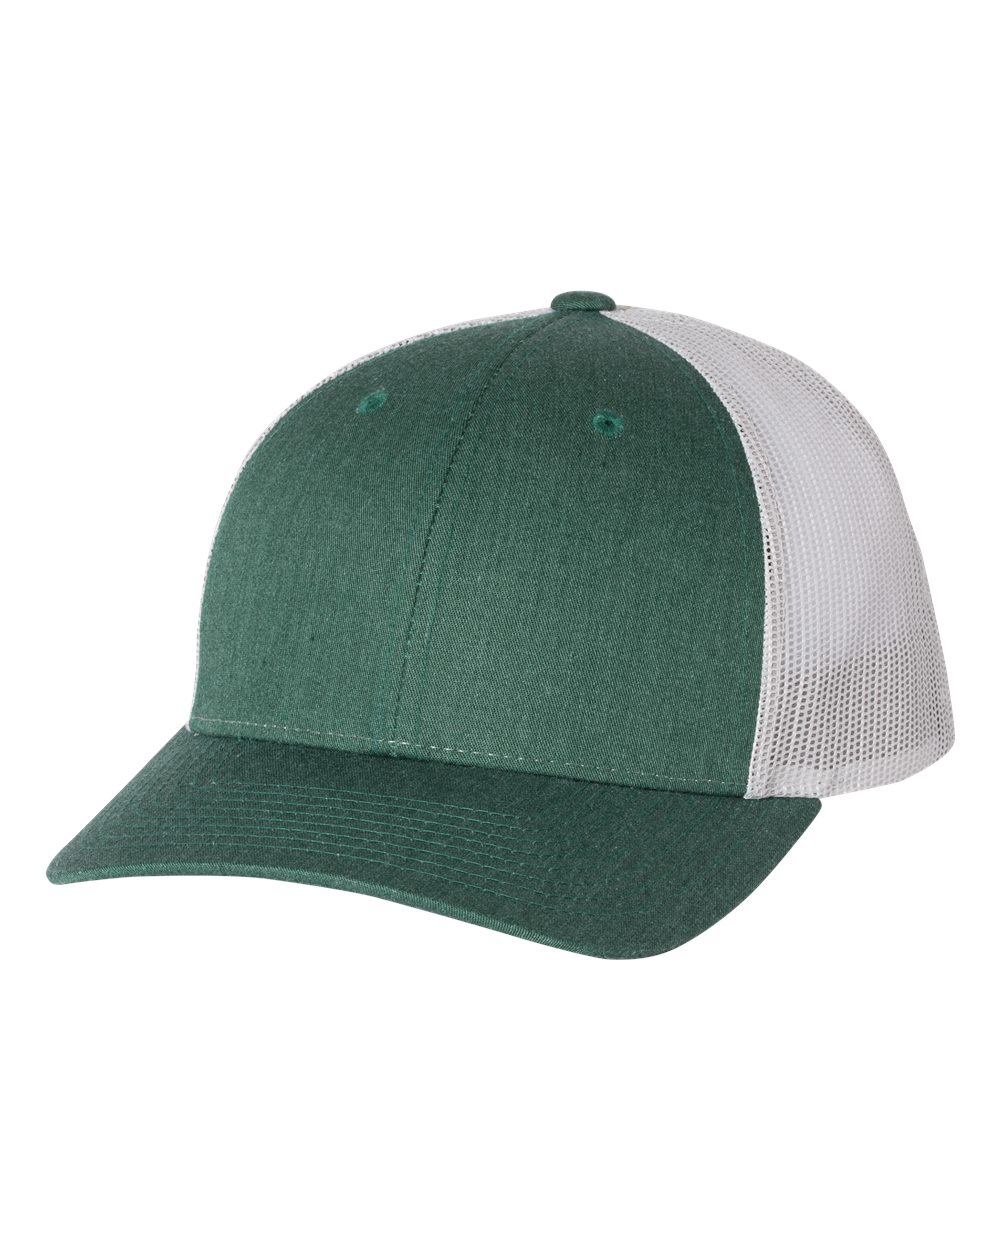 click to view Heather Dark Green/ Silver